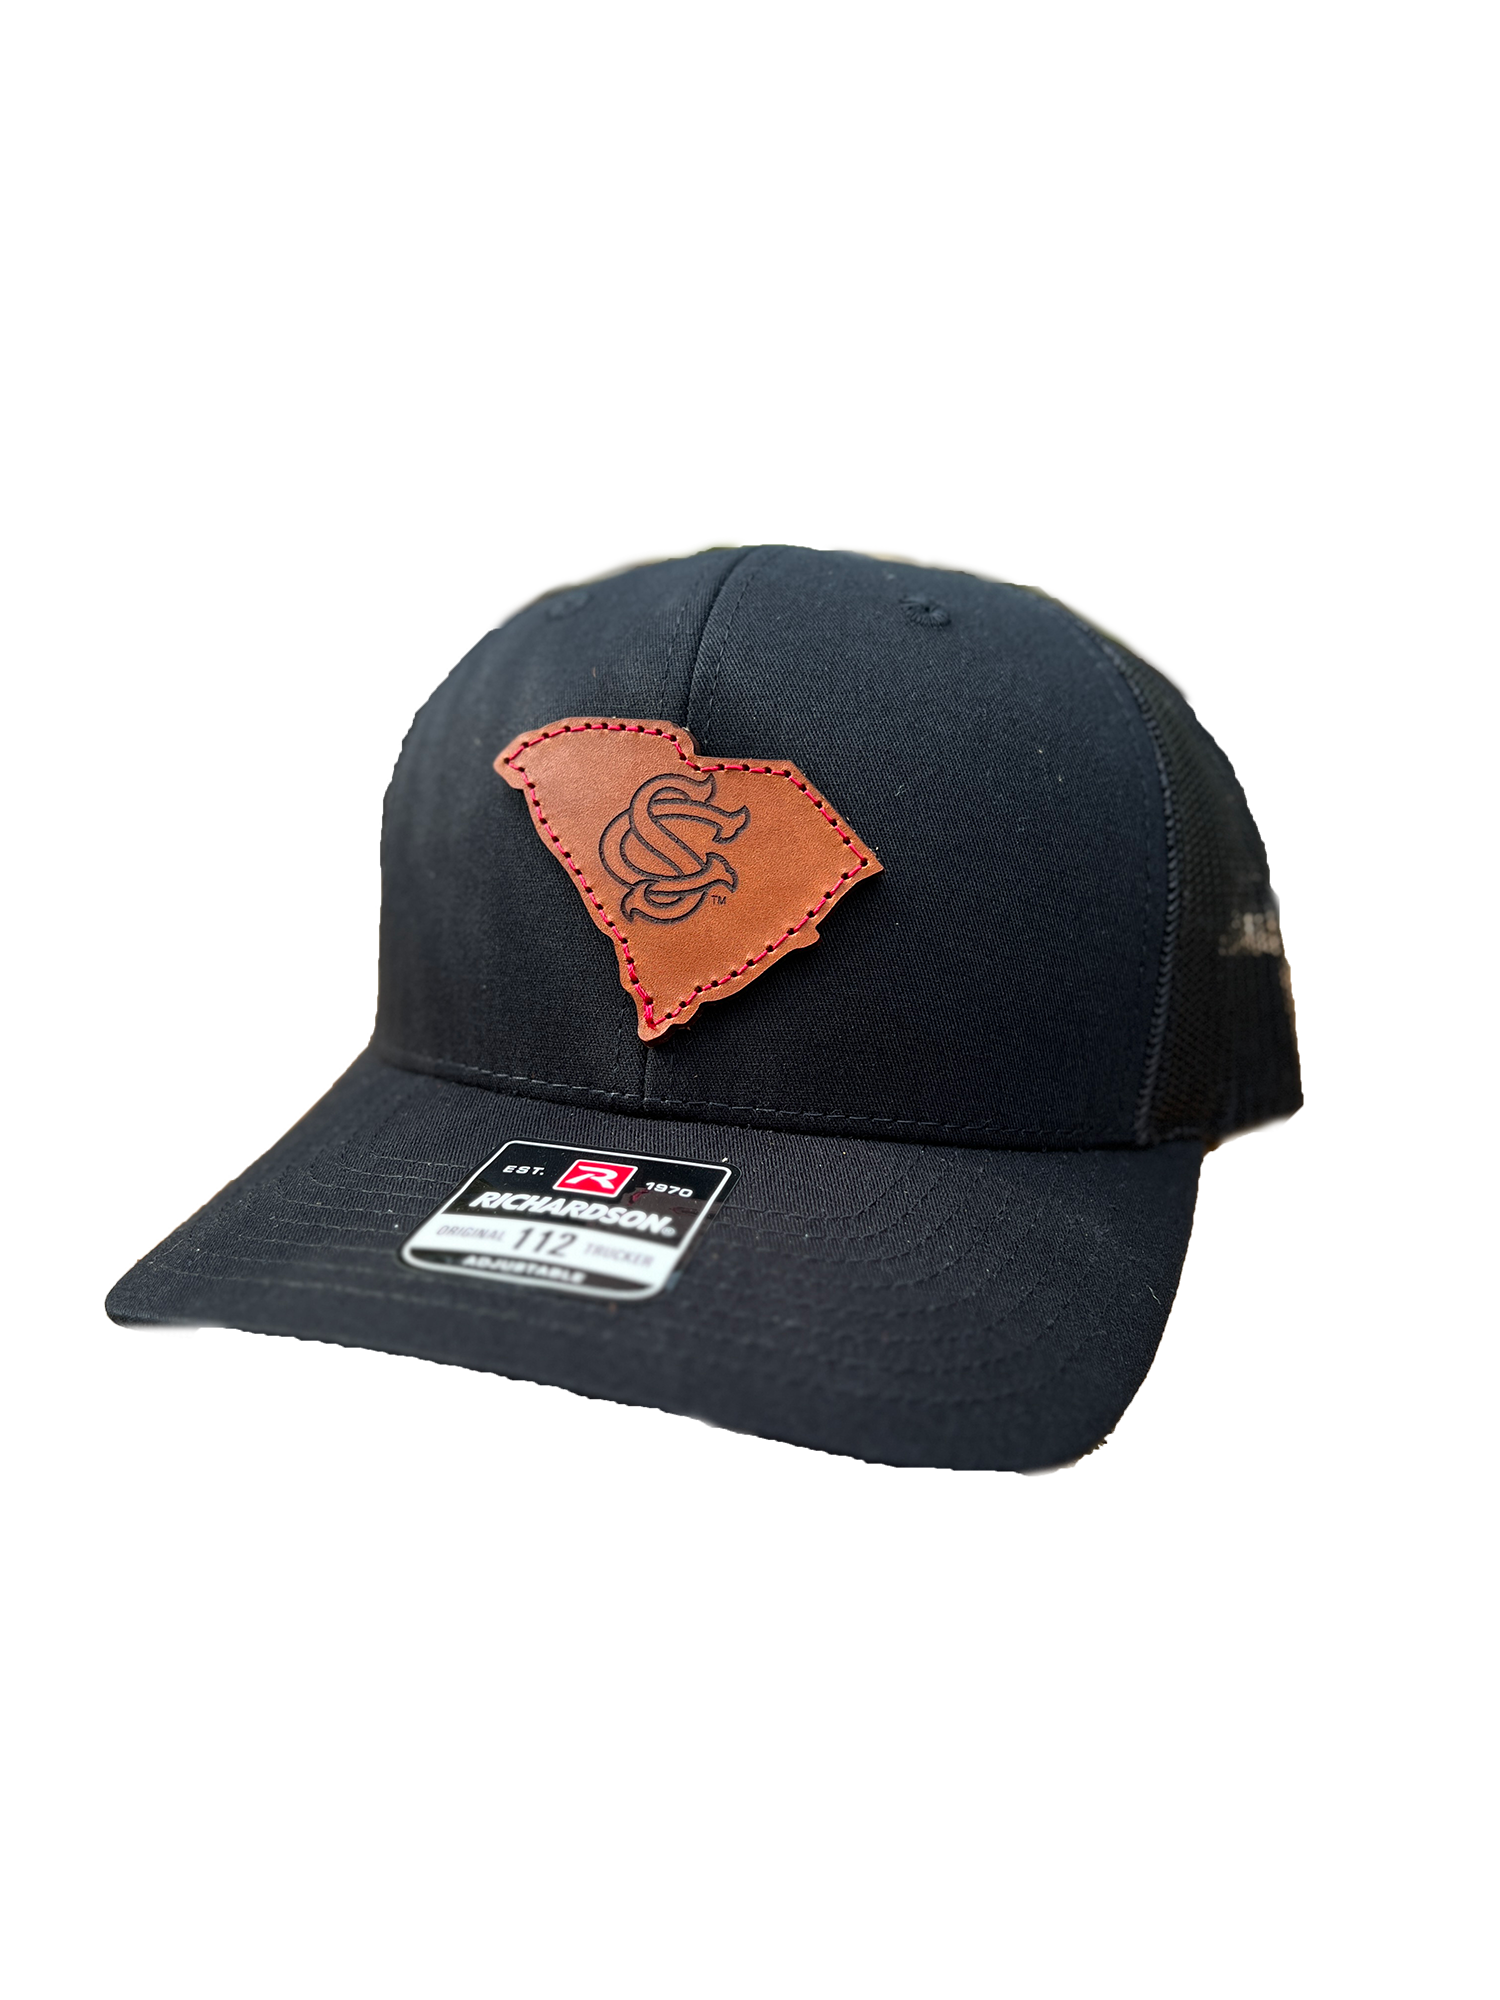 South Carolina Gamecocks Leather Patch Trucker Hat (State SC)